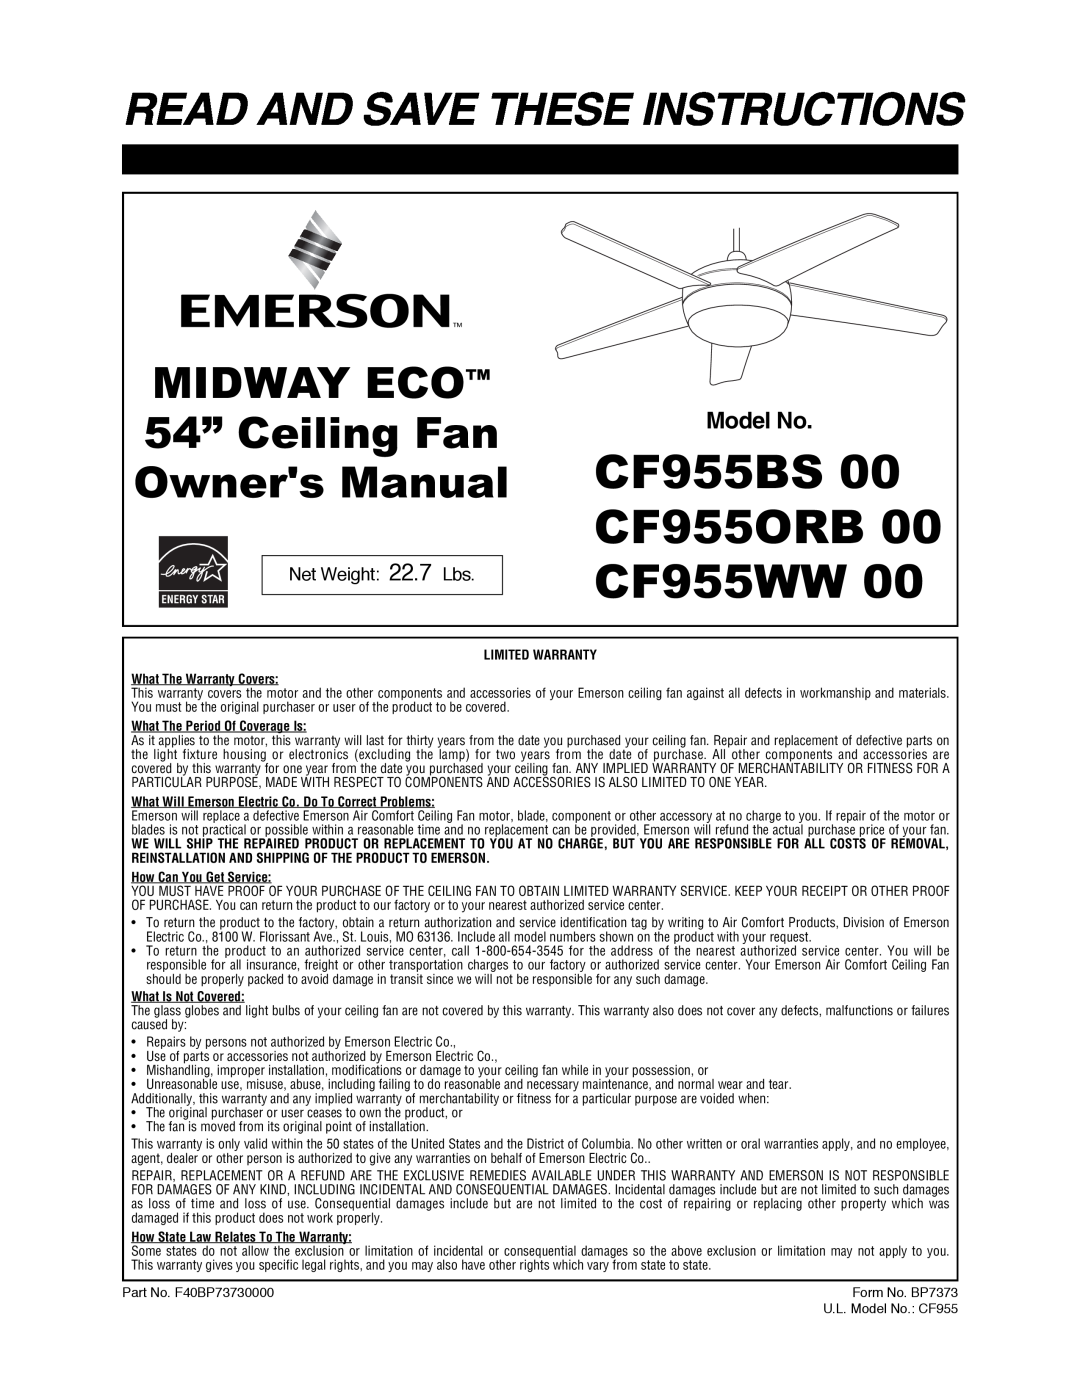 Emerson CF955BS 00 owner manual CF955ORB, CF955WW, Read And Save These Instructions, Midway Eco, 54” Ceiling Fan, Model No 